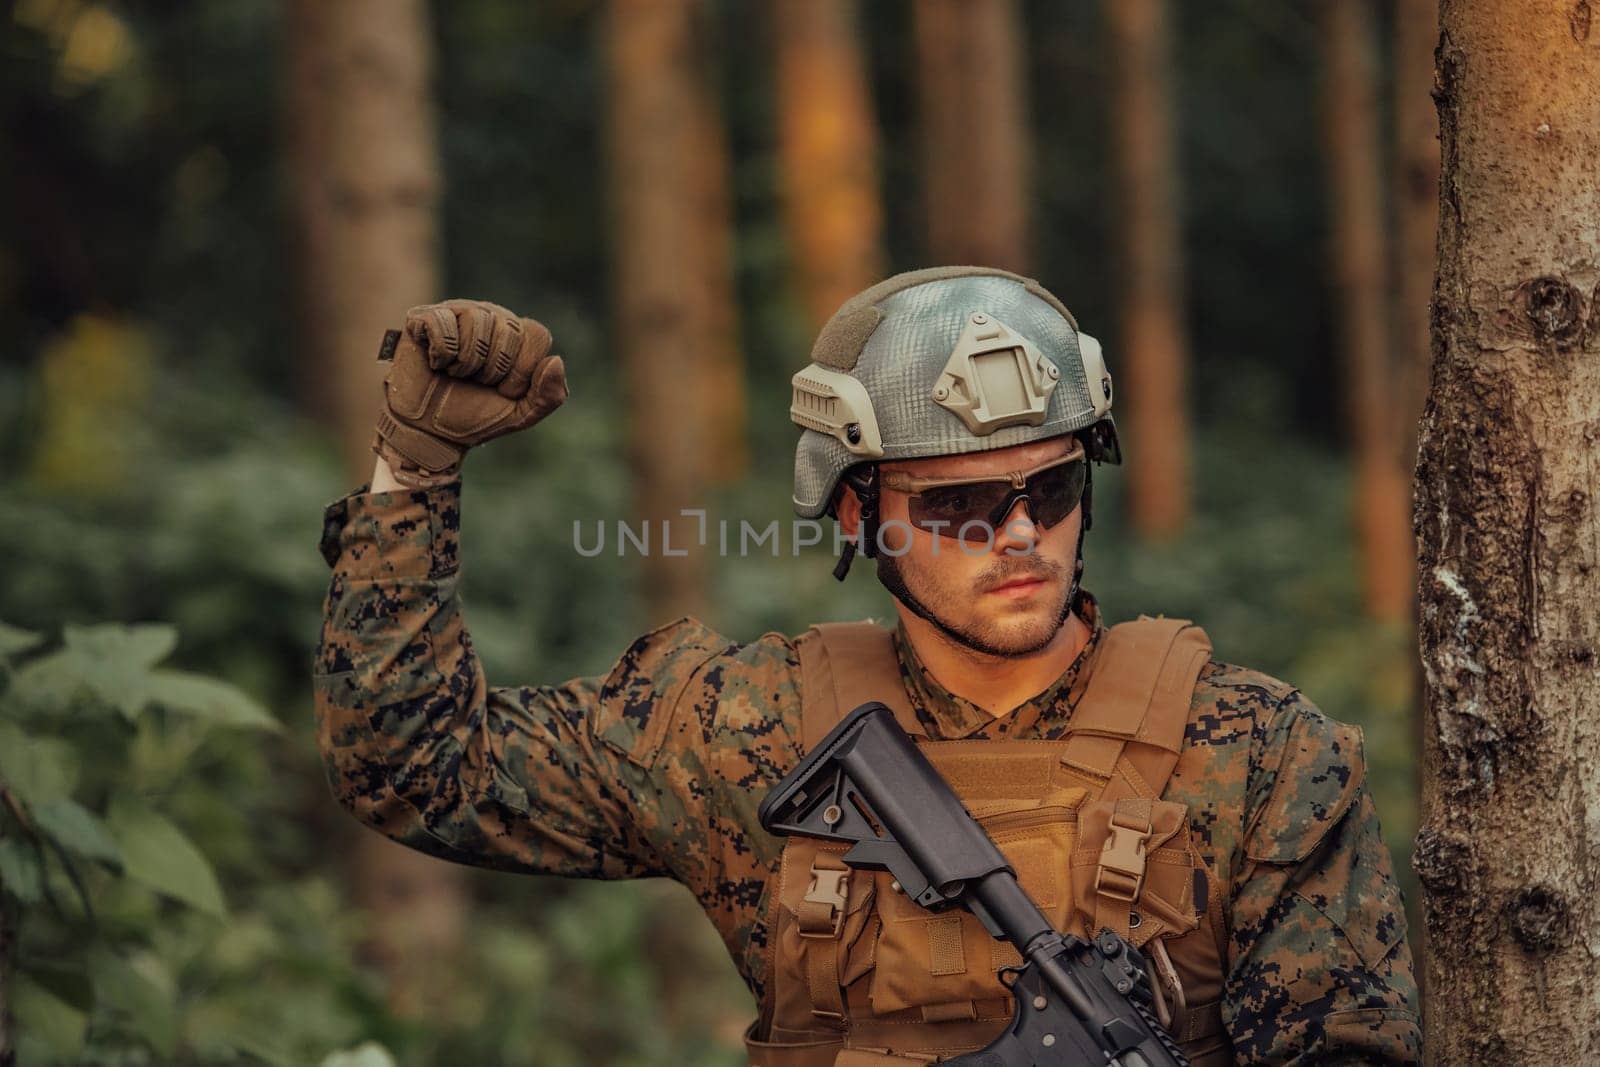 Modern warfare soldier officer is showing tactical hand signals to silently give orders and alers for squad team forest enviroment.